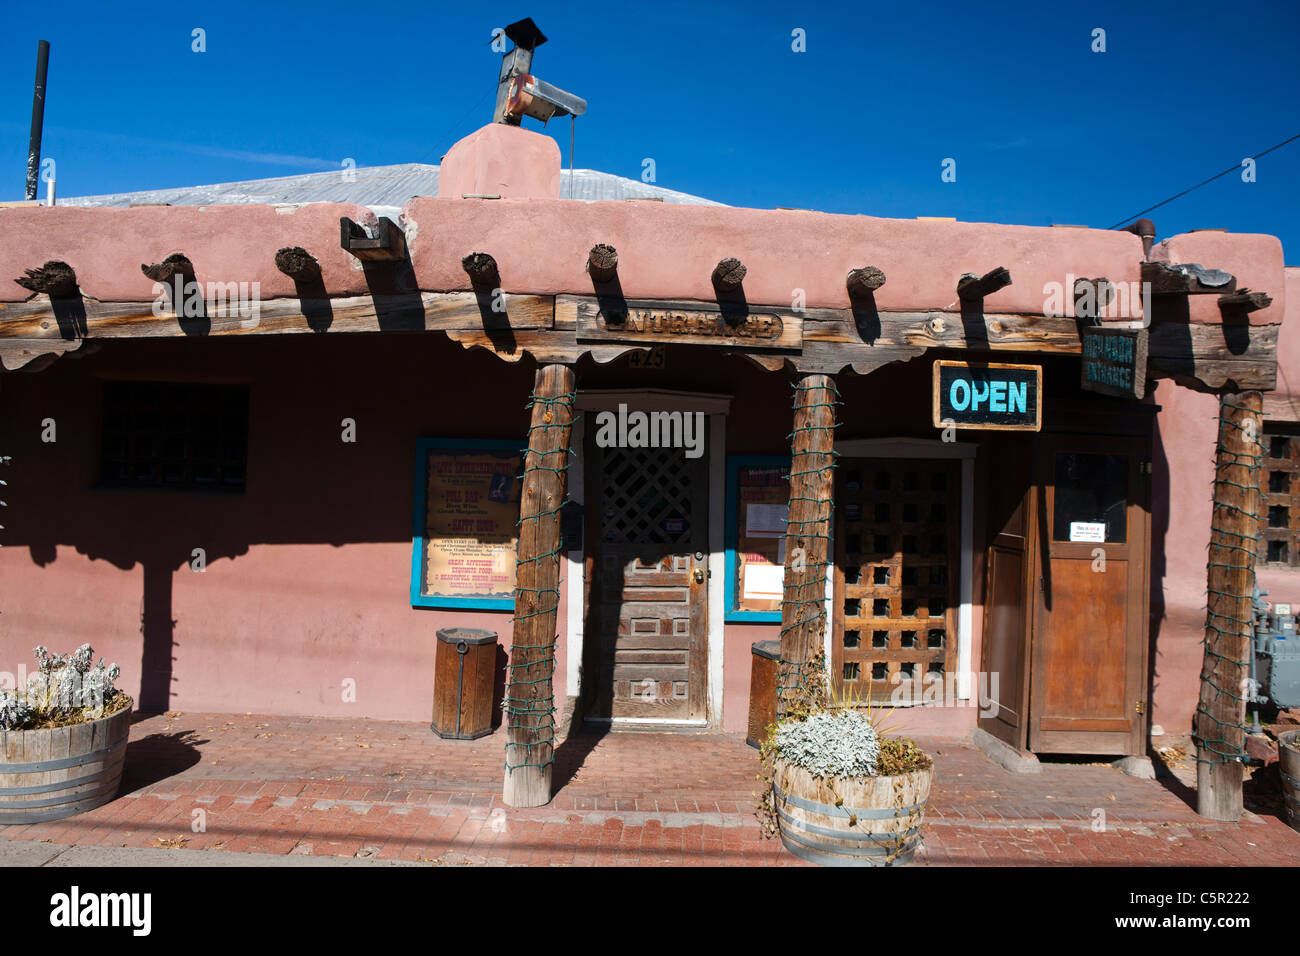 Exterior of High Noon Restaurant and Saloon, Albuquerque, New Mexico, United States of America Stock Photo